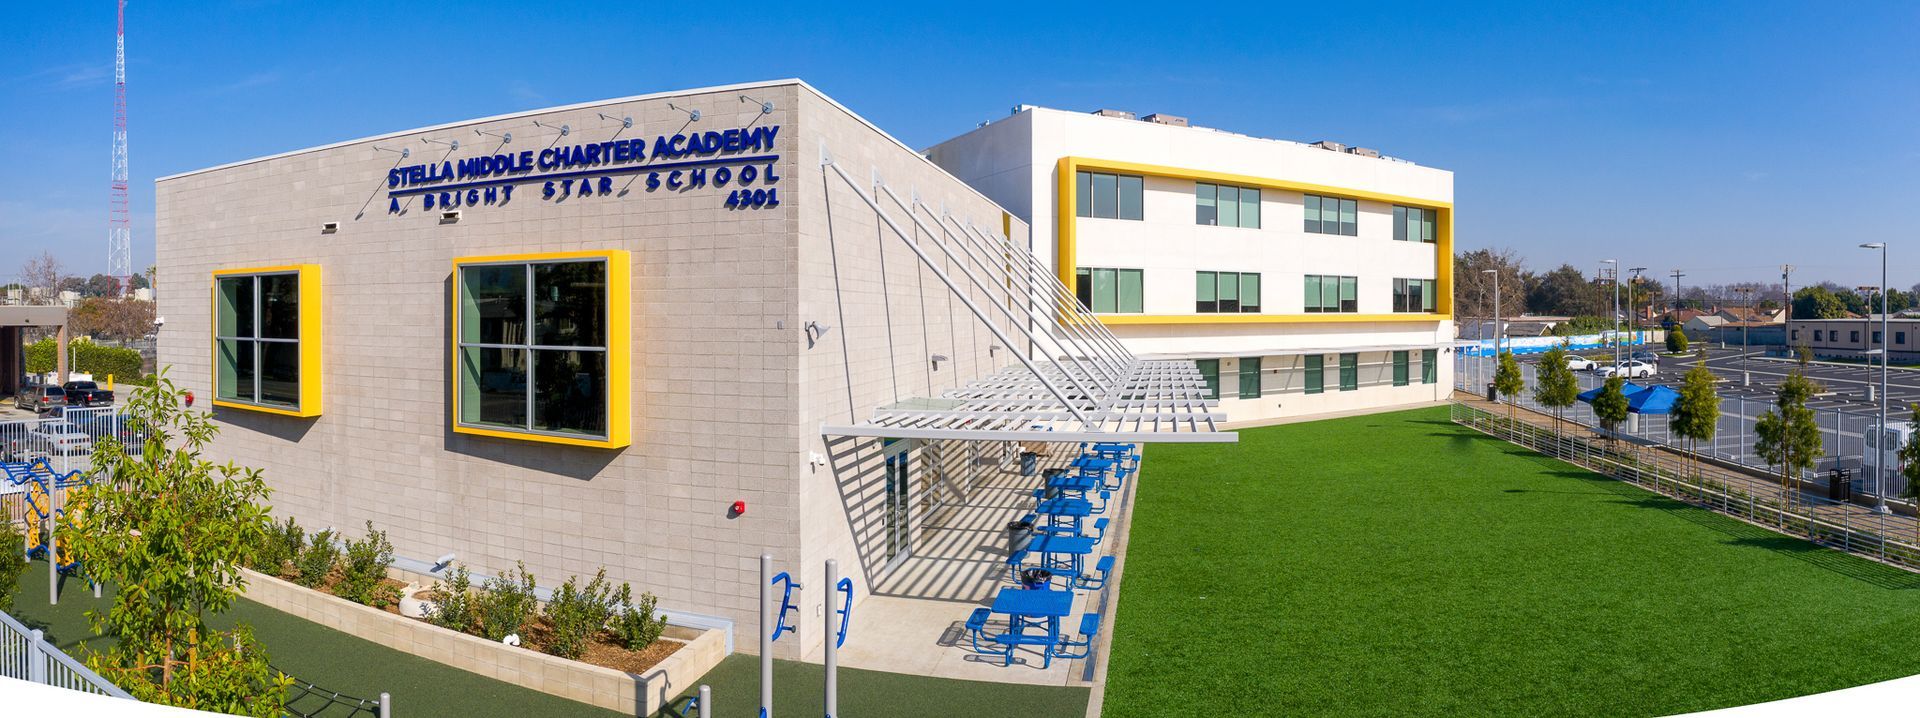 Stella Middle Charter Academy Side View — San Clemente, CA — Consolidated Contracting